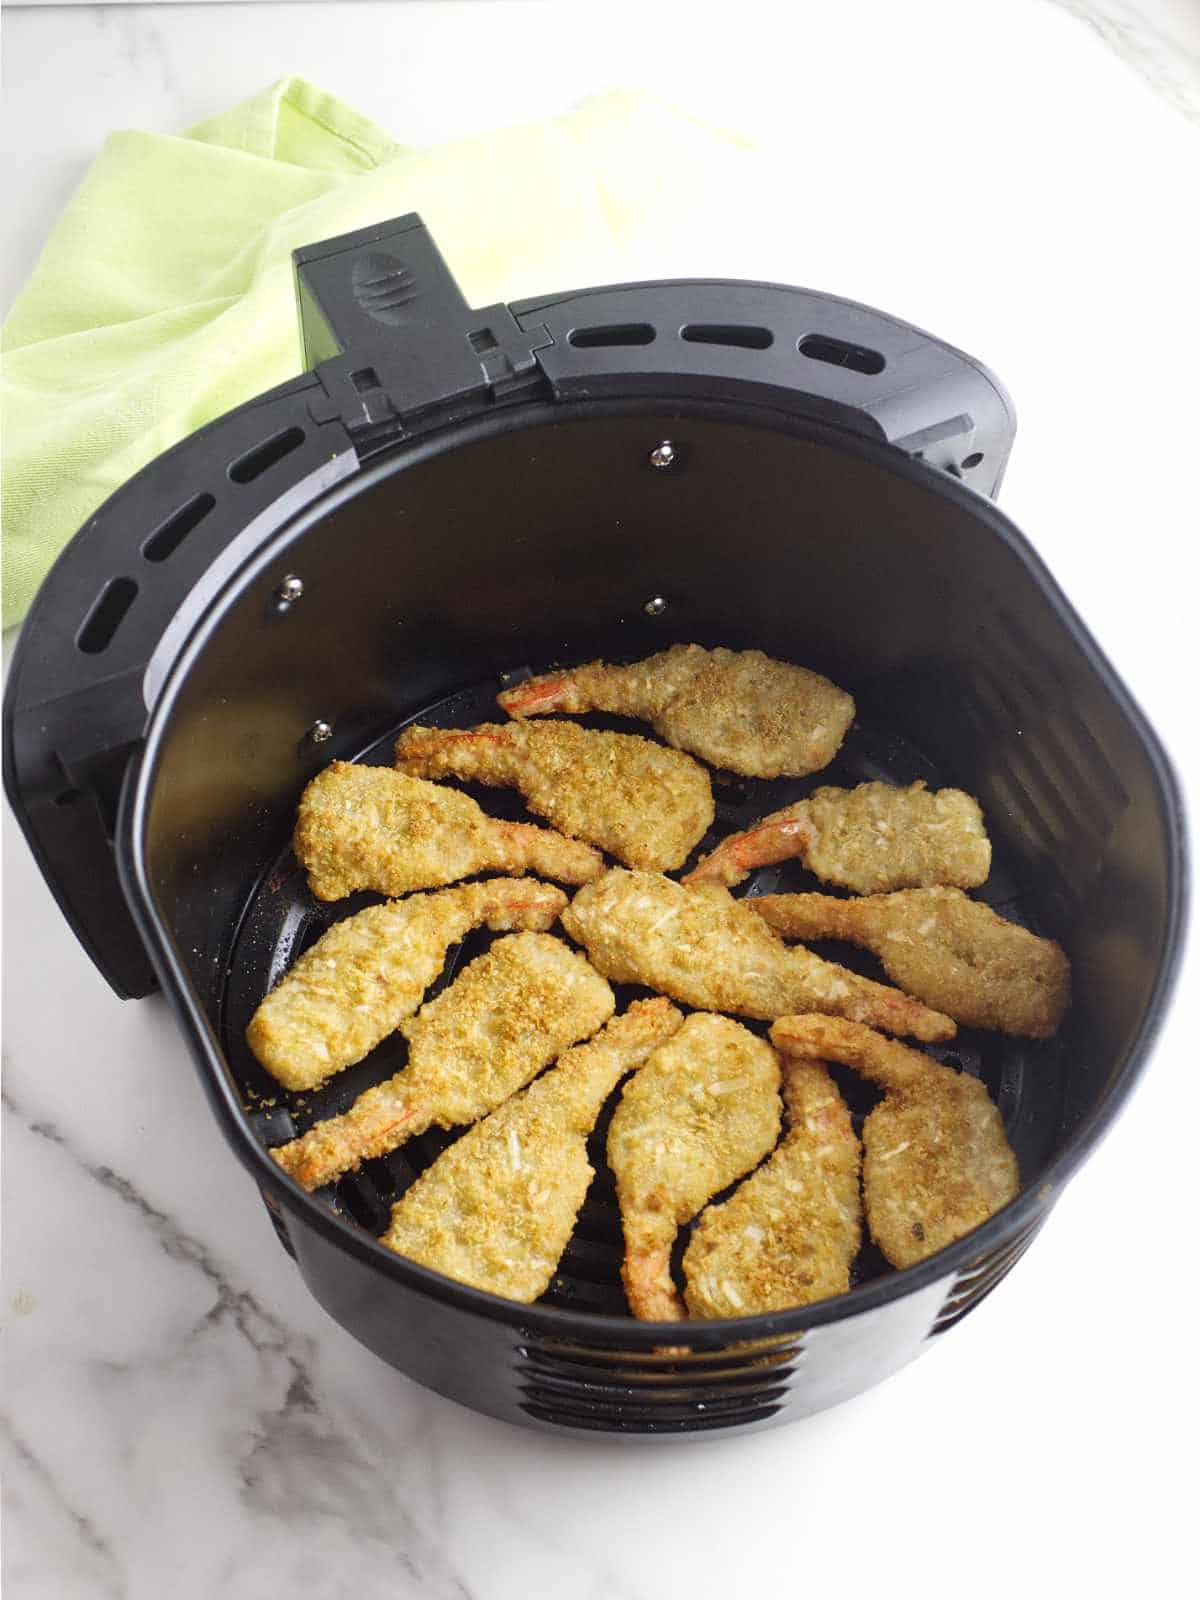 frozen coconut shrimp spread out in a single layer in air fryer basket.